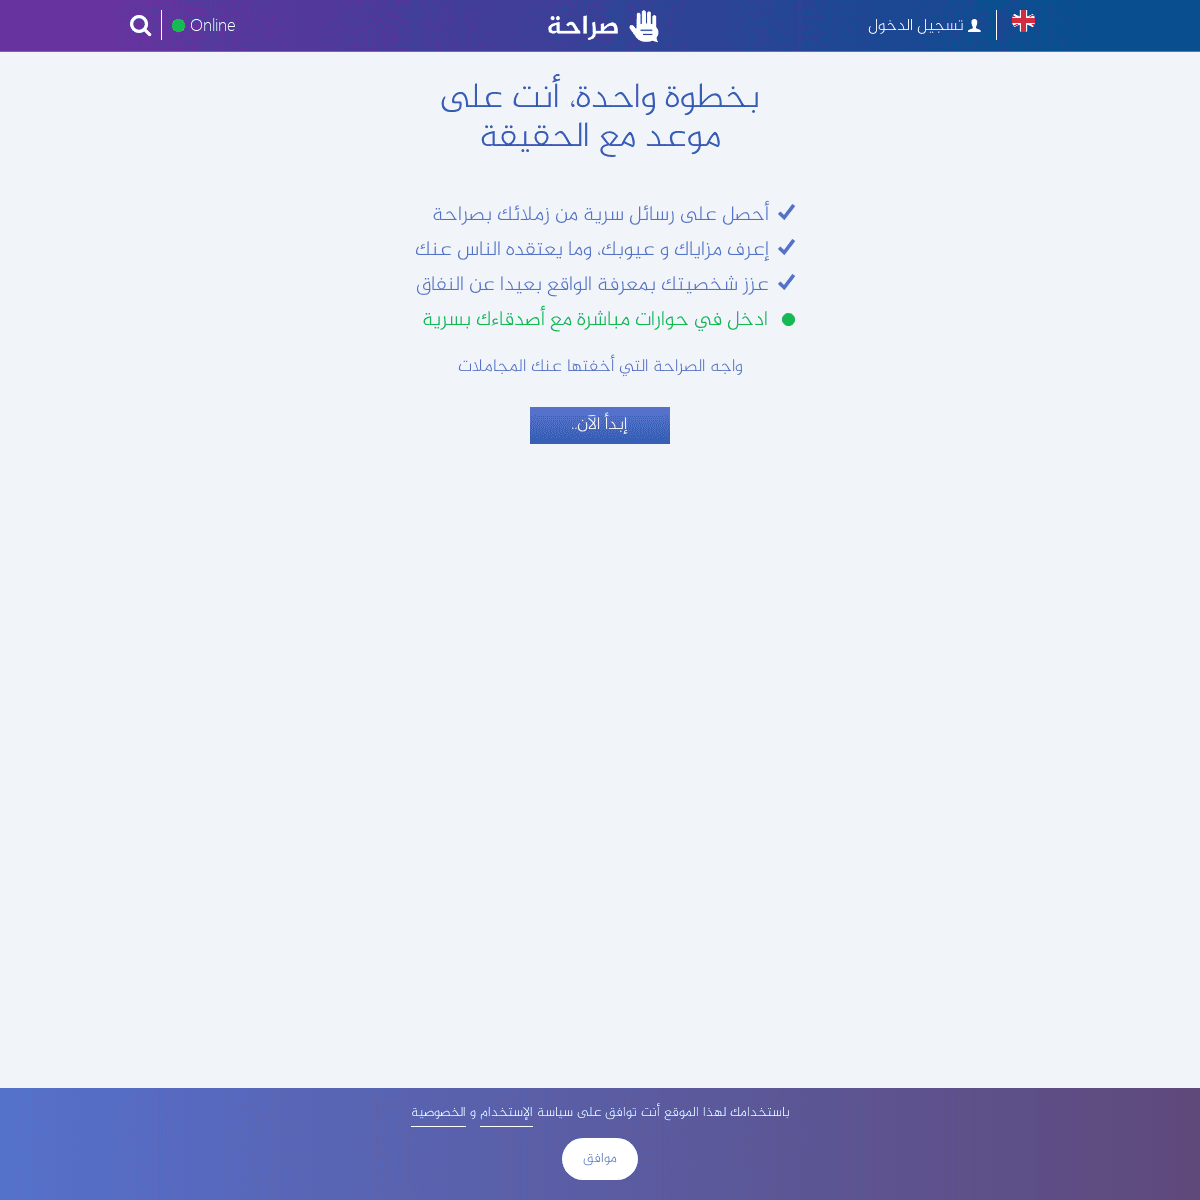 A complete backup of saraha.online